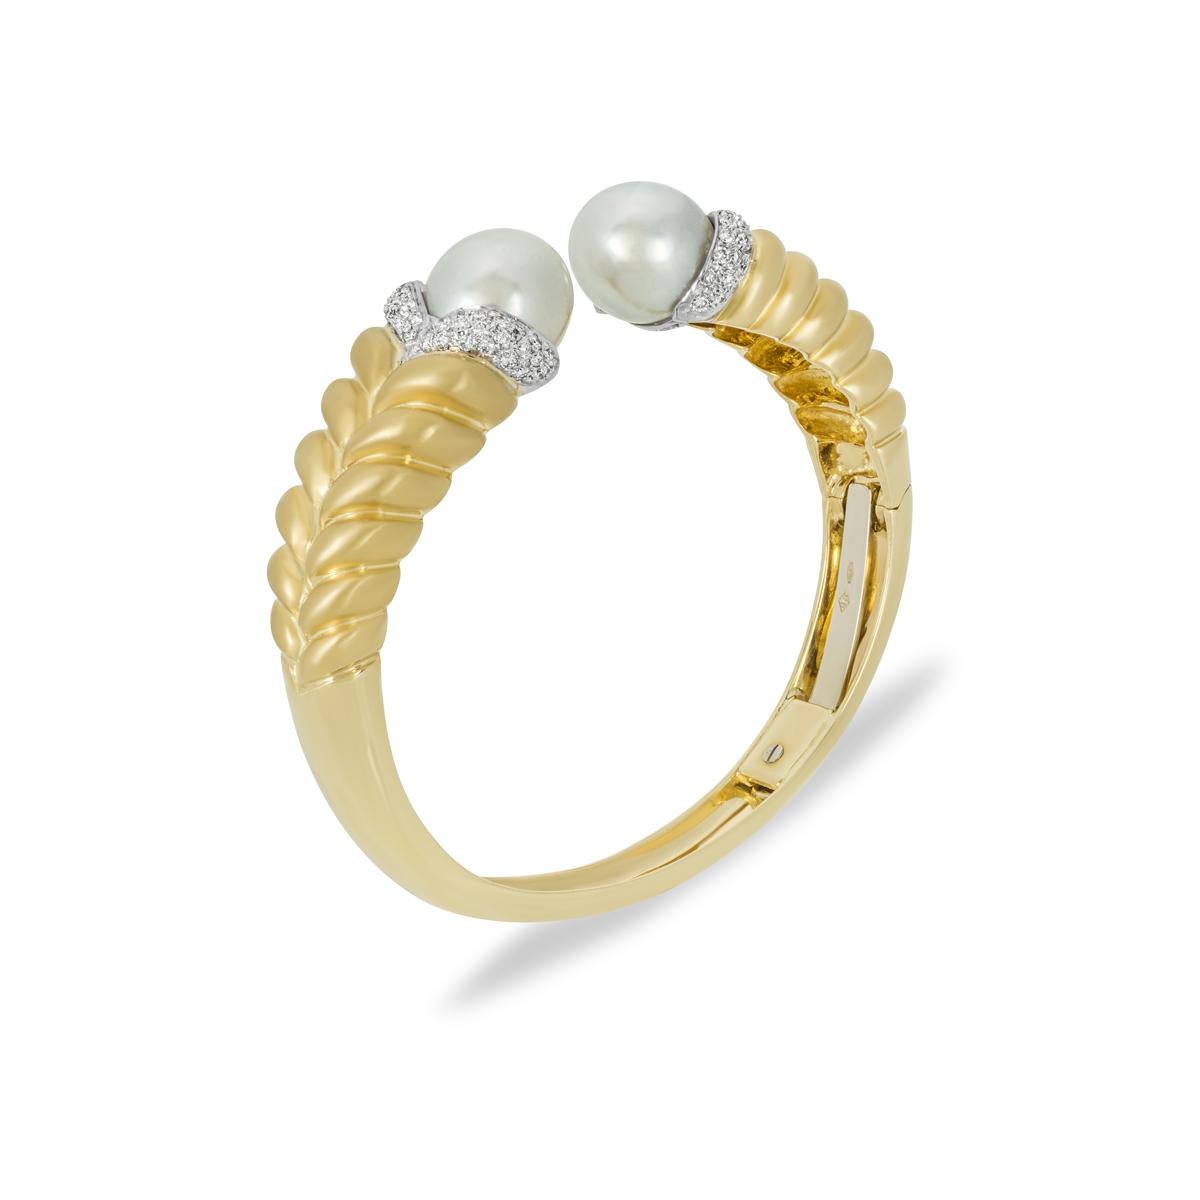 A demure 18k yellow gold pearl and diamond cuff bangle. Two white pearls adorn the terminations measuring 12mm wide and accented by pave set diamonds. The 84 round brilliant cut diamonds have an approximate total weight of 0.92ct, F-G colour and SI